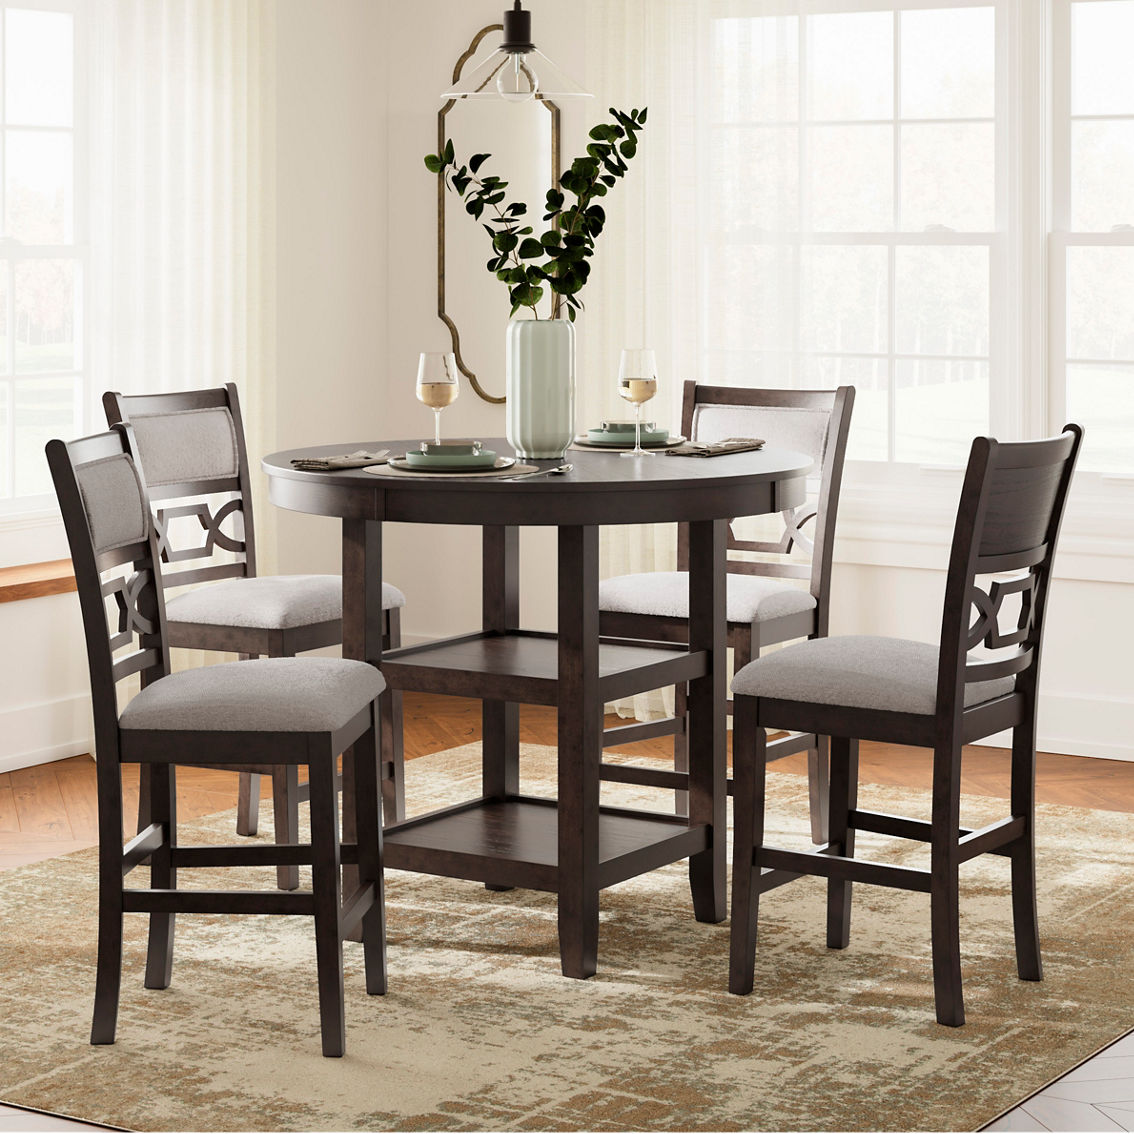 Signature Design by Ashley Langwest 5 pc. Counter Height Dining Set - Image 3 of 4